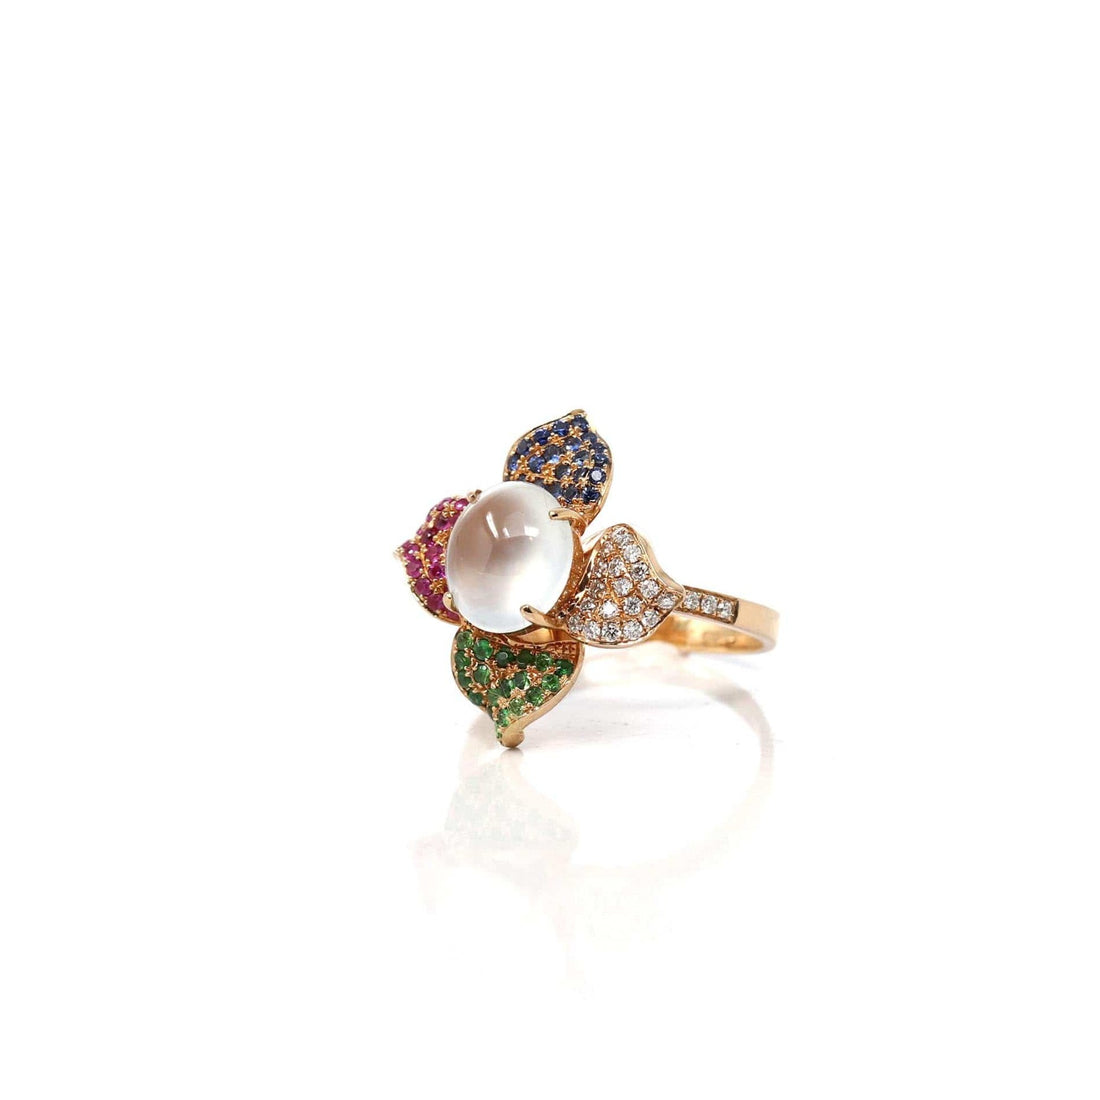 Baikalla Jewelry Jadeite Engagement Ring Copy of 18k Rose Gold Natural Ice Jadeite Engagement Ring With Diamonds and Ruby